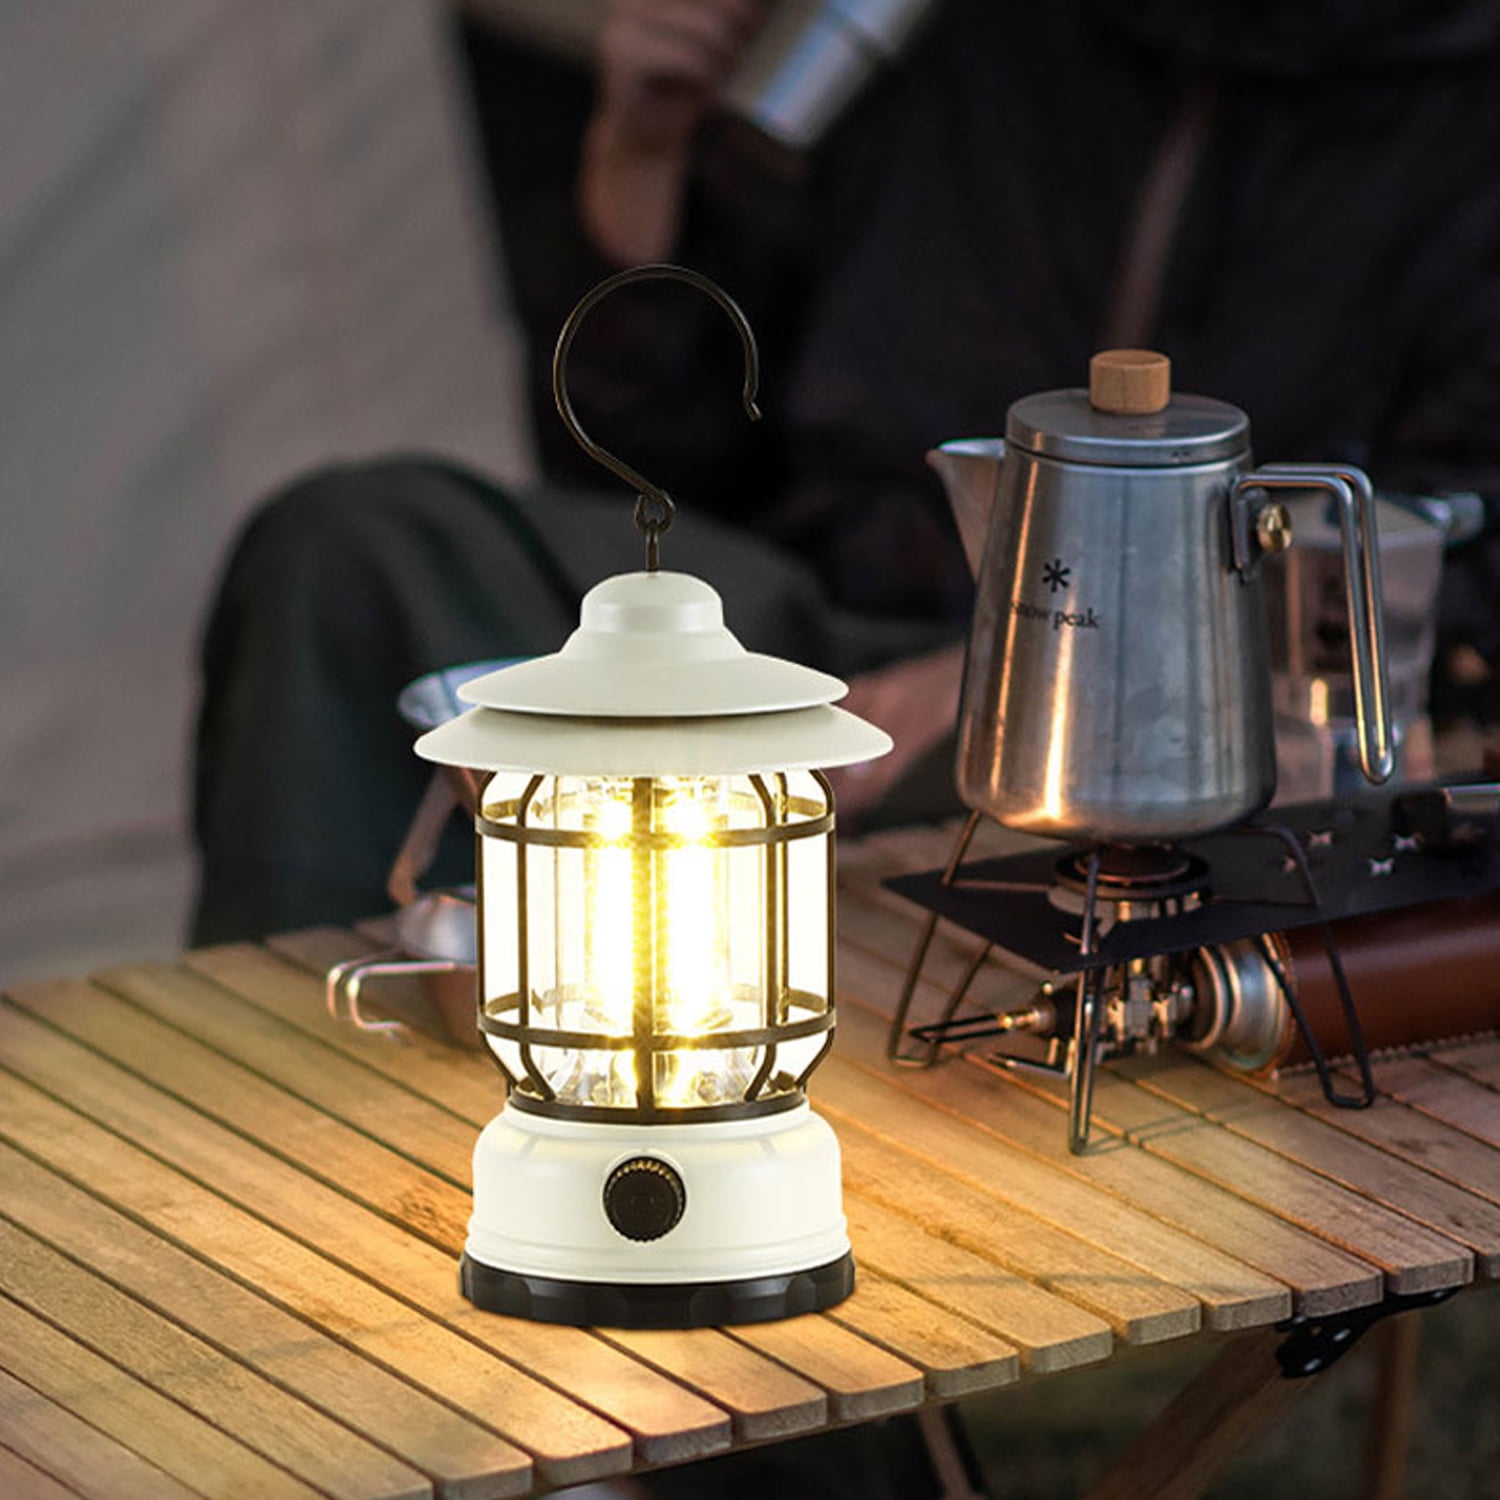 Vintage LED Camping Lantern USB Rechargeable Portable Waterproof